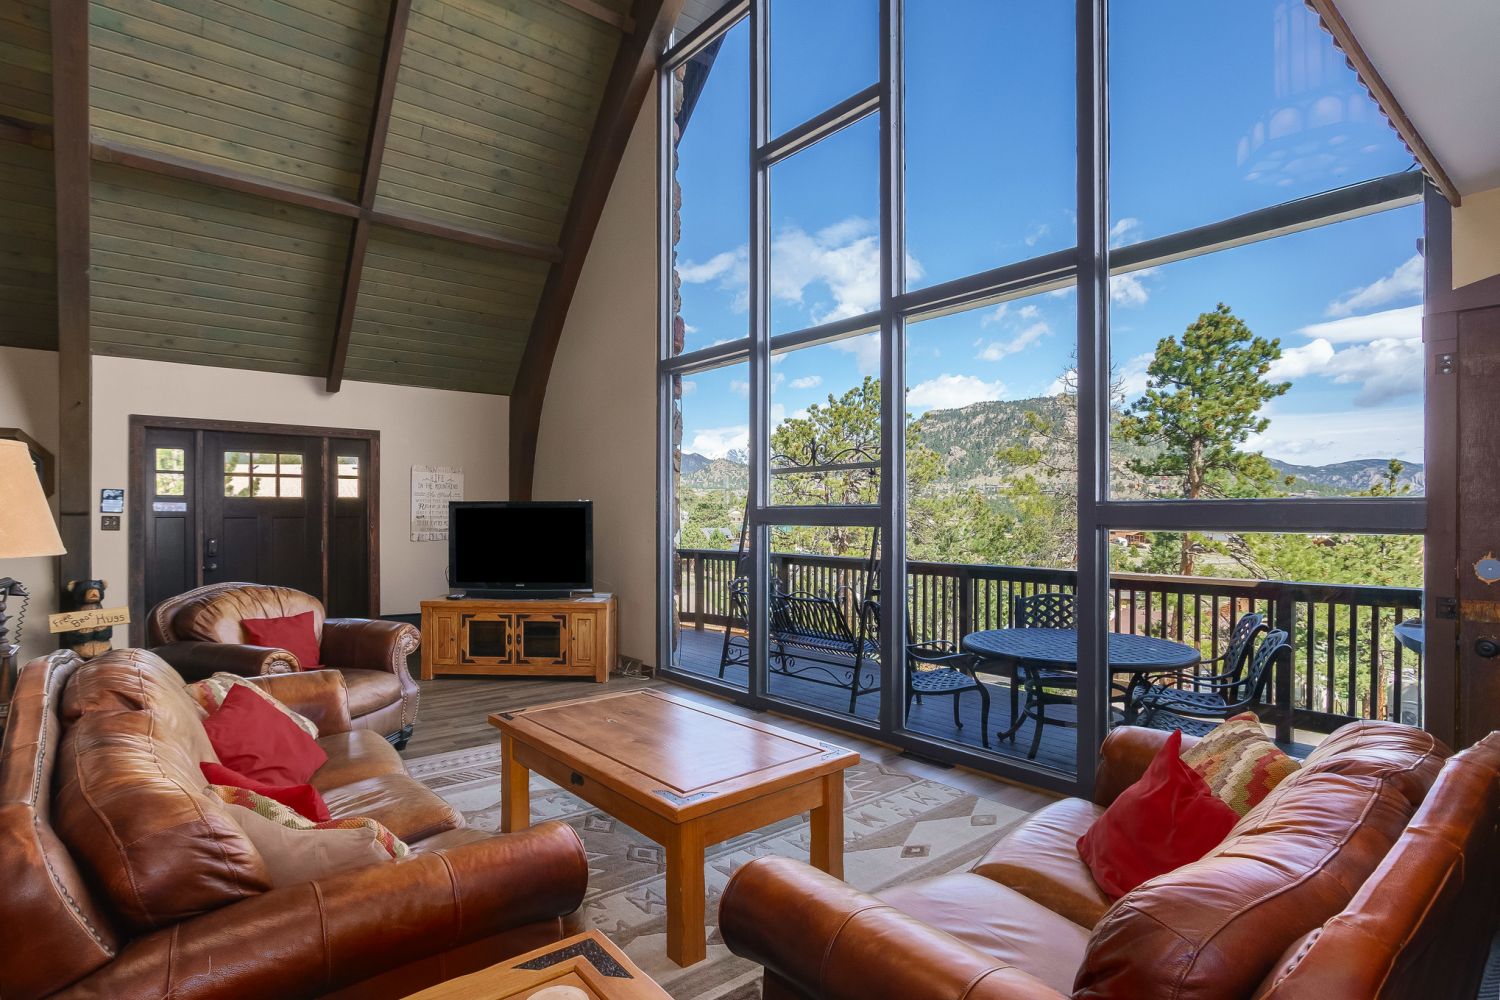 Sky View in the Rockies - Living Room features floor to ceiling  windows overlooking the deck with mountain views